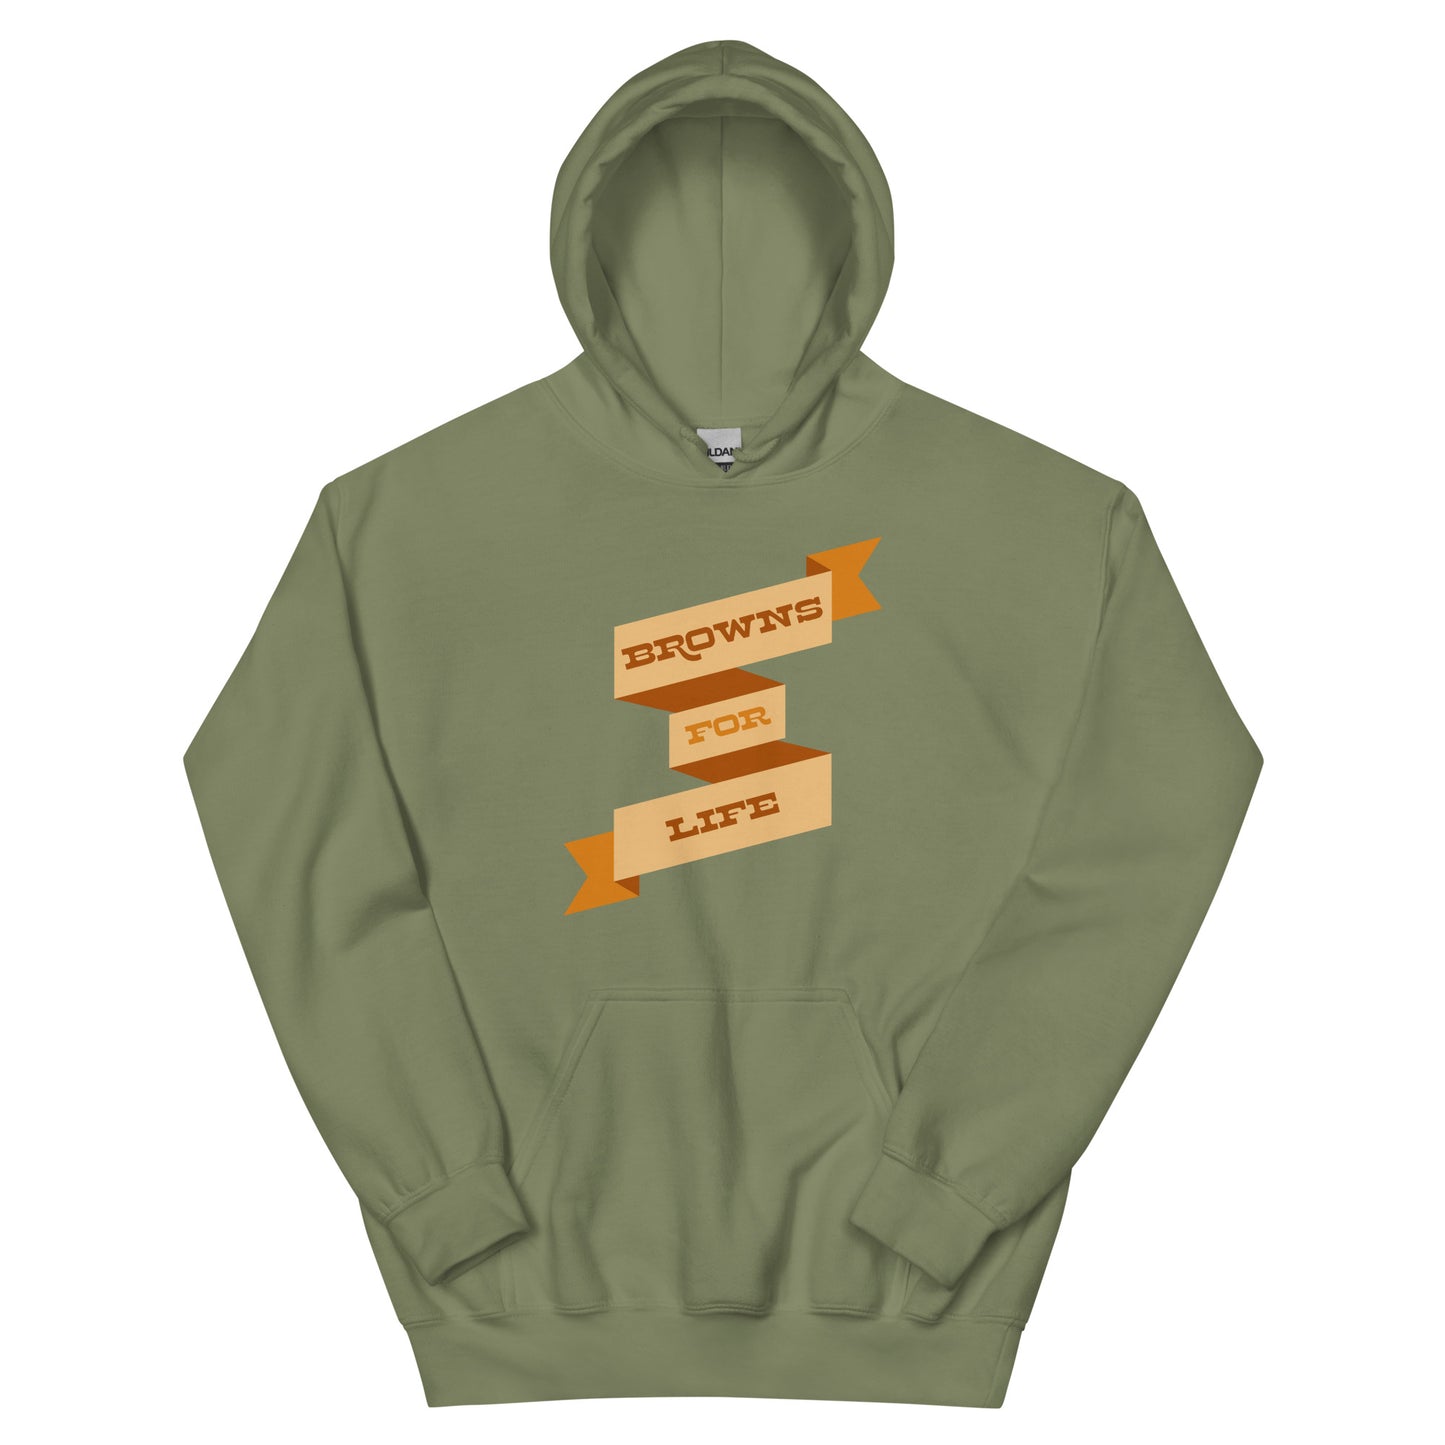 Browns for Life Unisex Hoodie